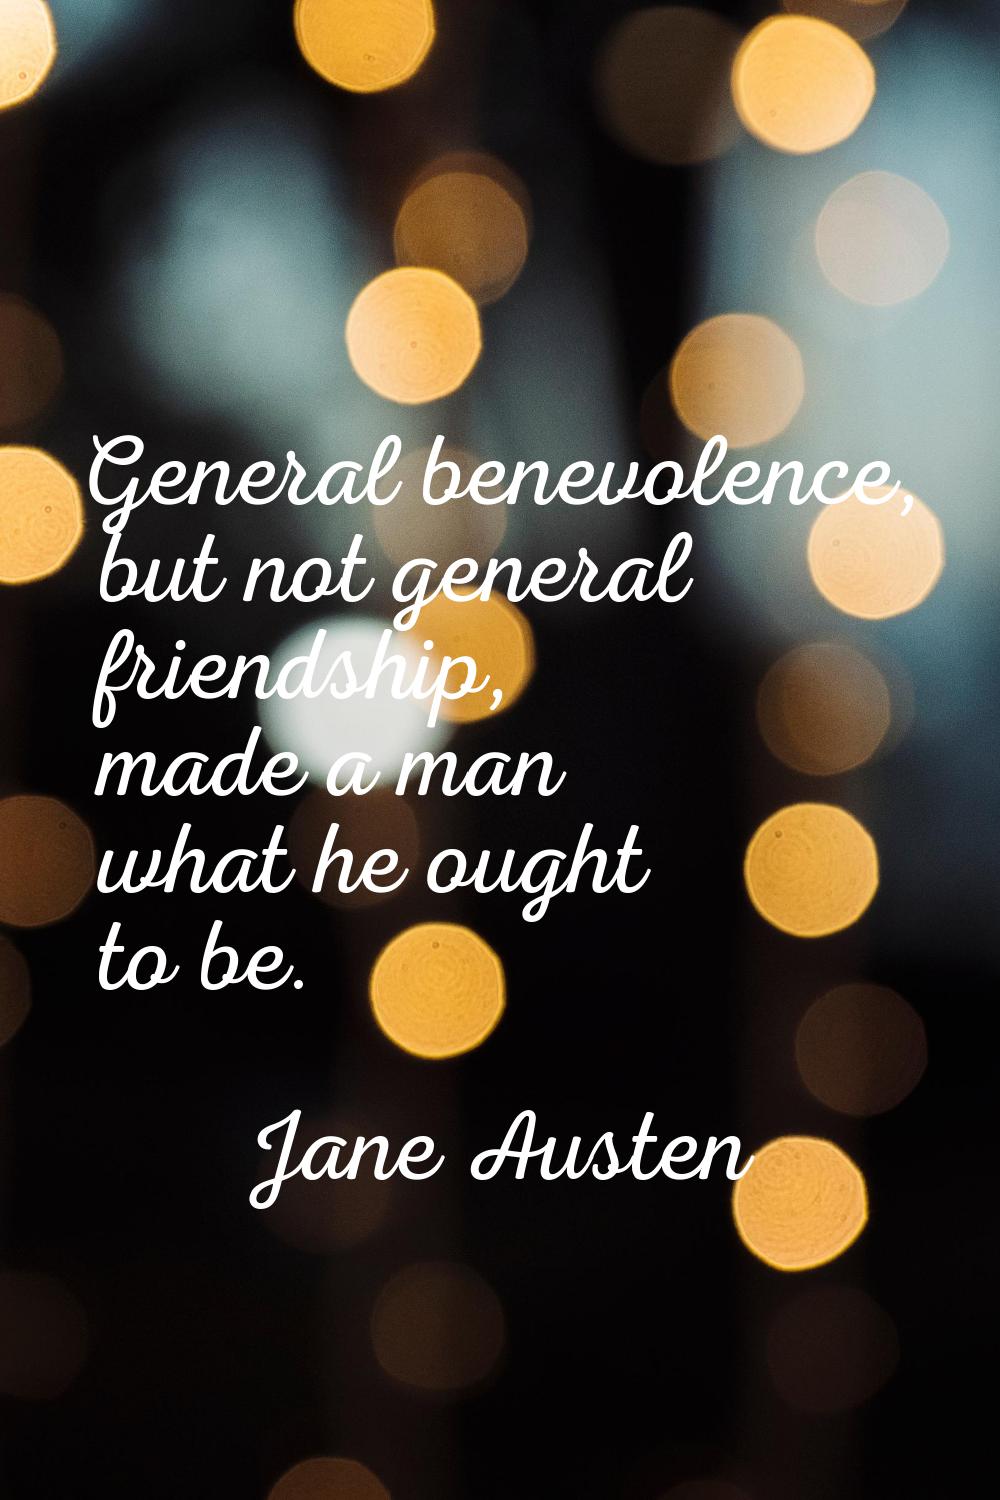 General benevolence, but not general friendship, made a man what he ought to be.